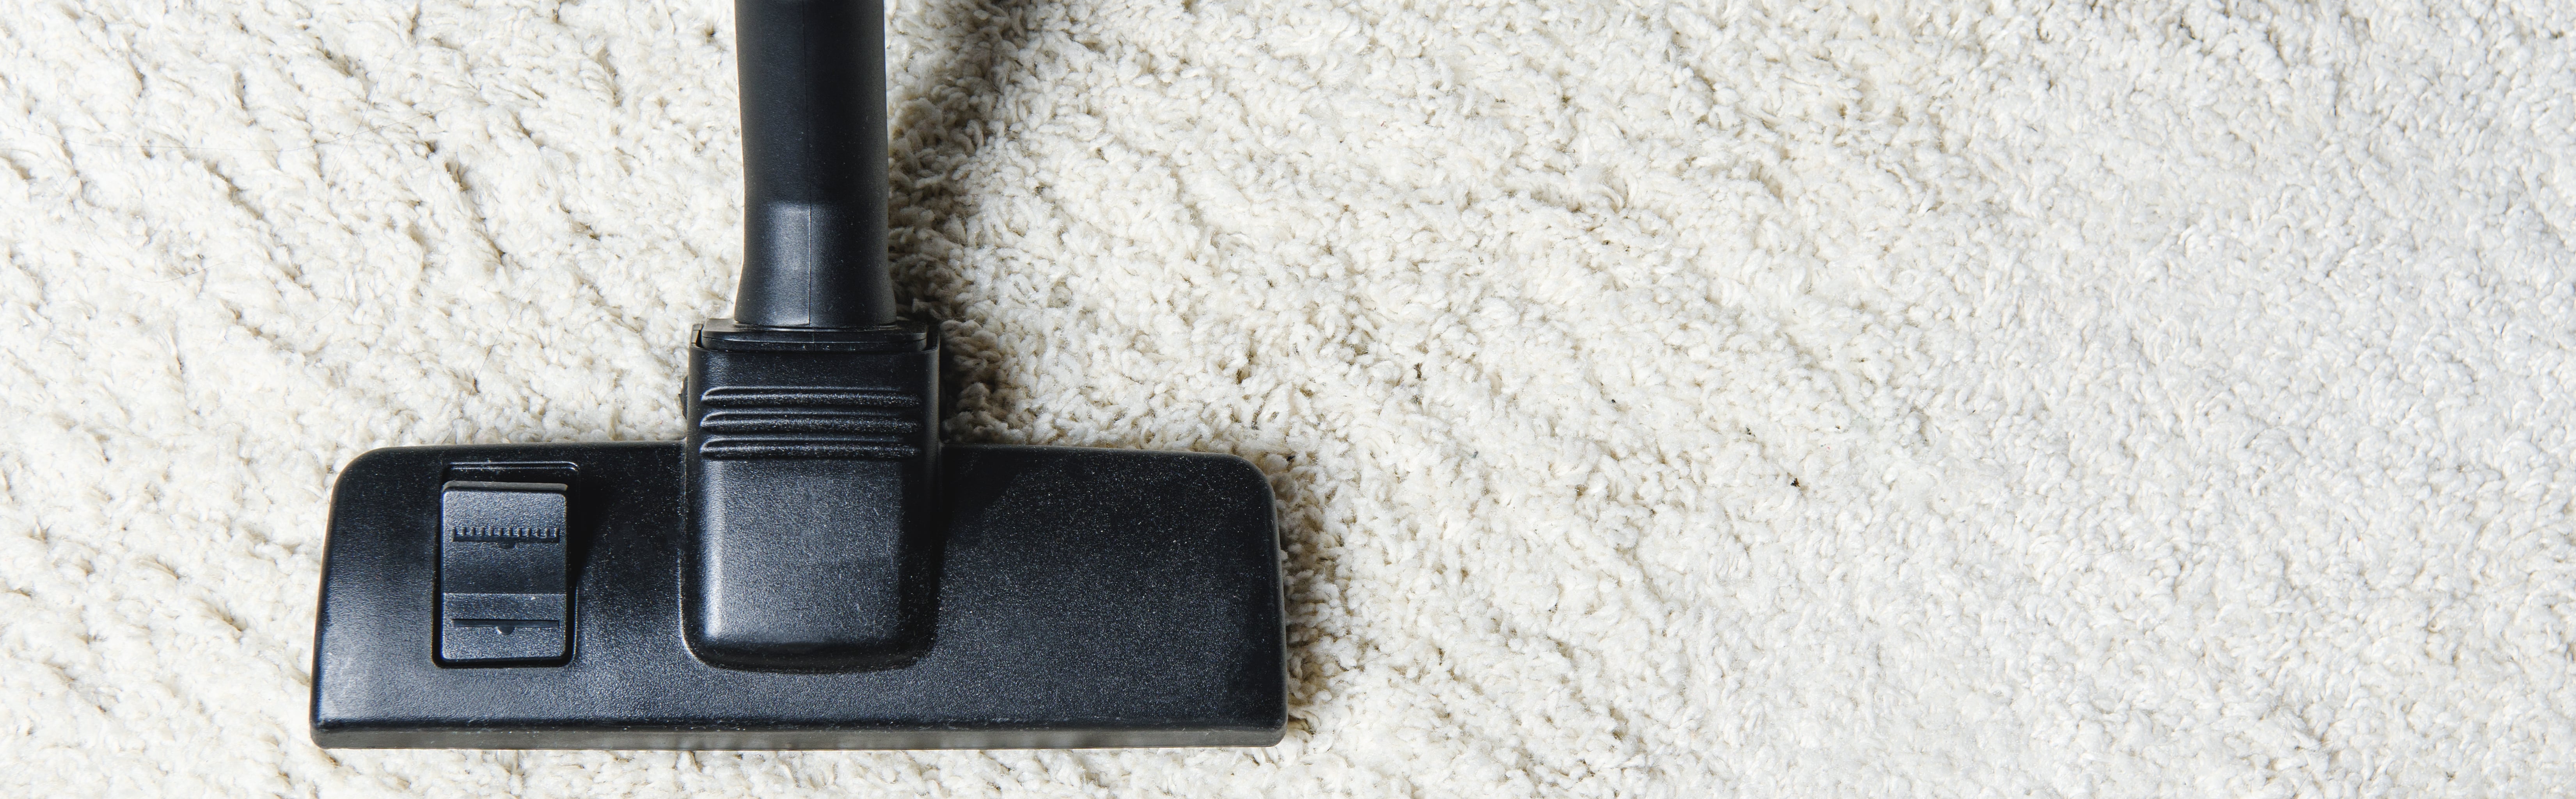 Carpet Cleaning Cost in Ogden